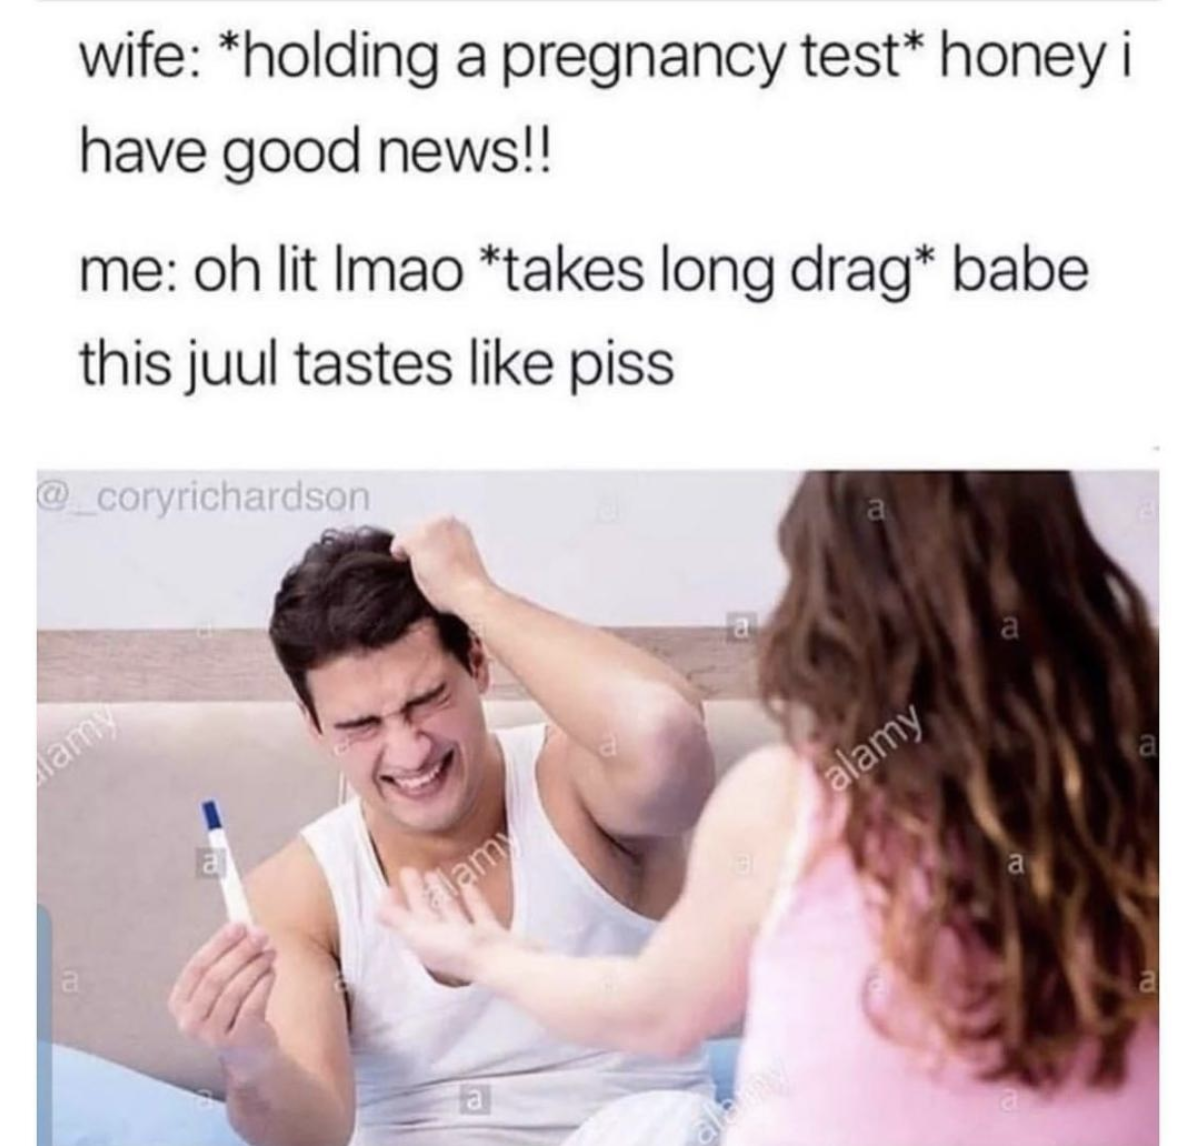 pregnant test with husband - wife holding a pregnancy test honey i have good news!! me oh lit Imao takes long drag babe this juul tastes piss alamy